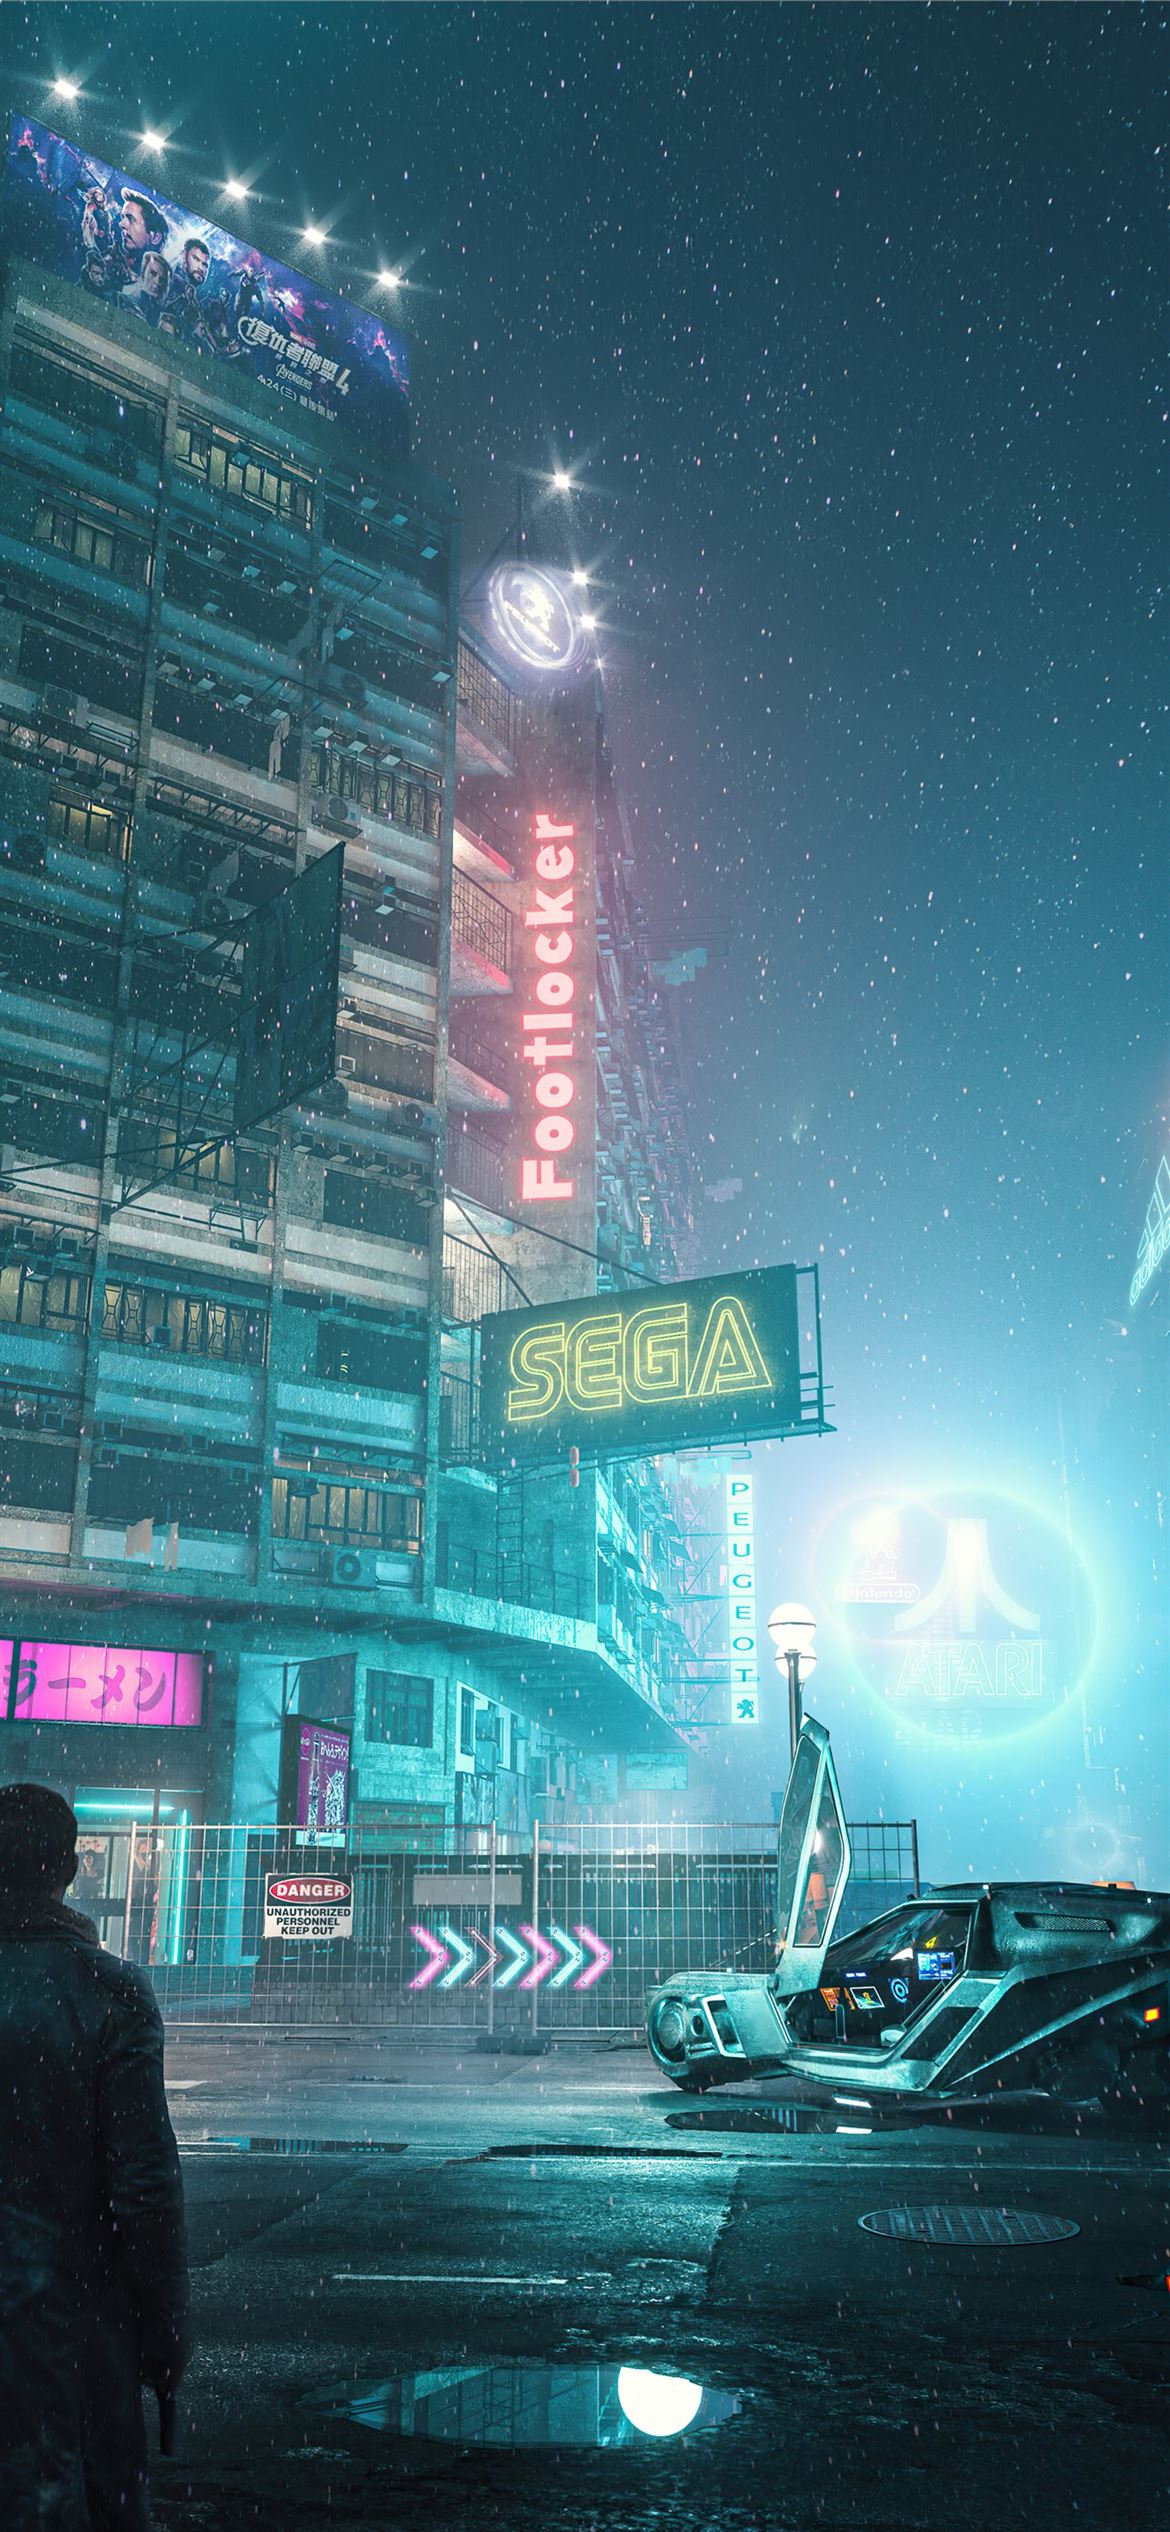 Blade Runner 2049 Tokyo Cyberpunk 4k Sony Xperia X... iPhone Wallpapers  Free Download